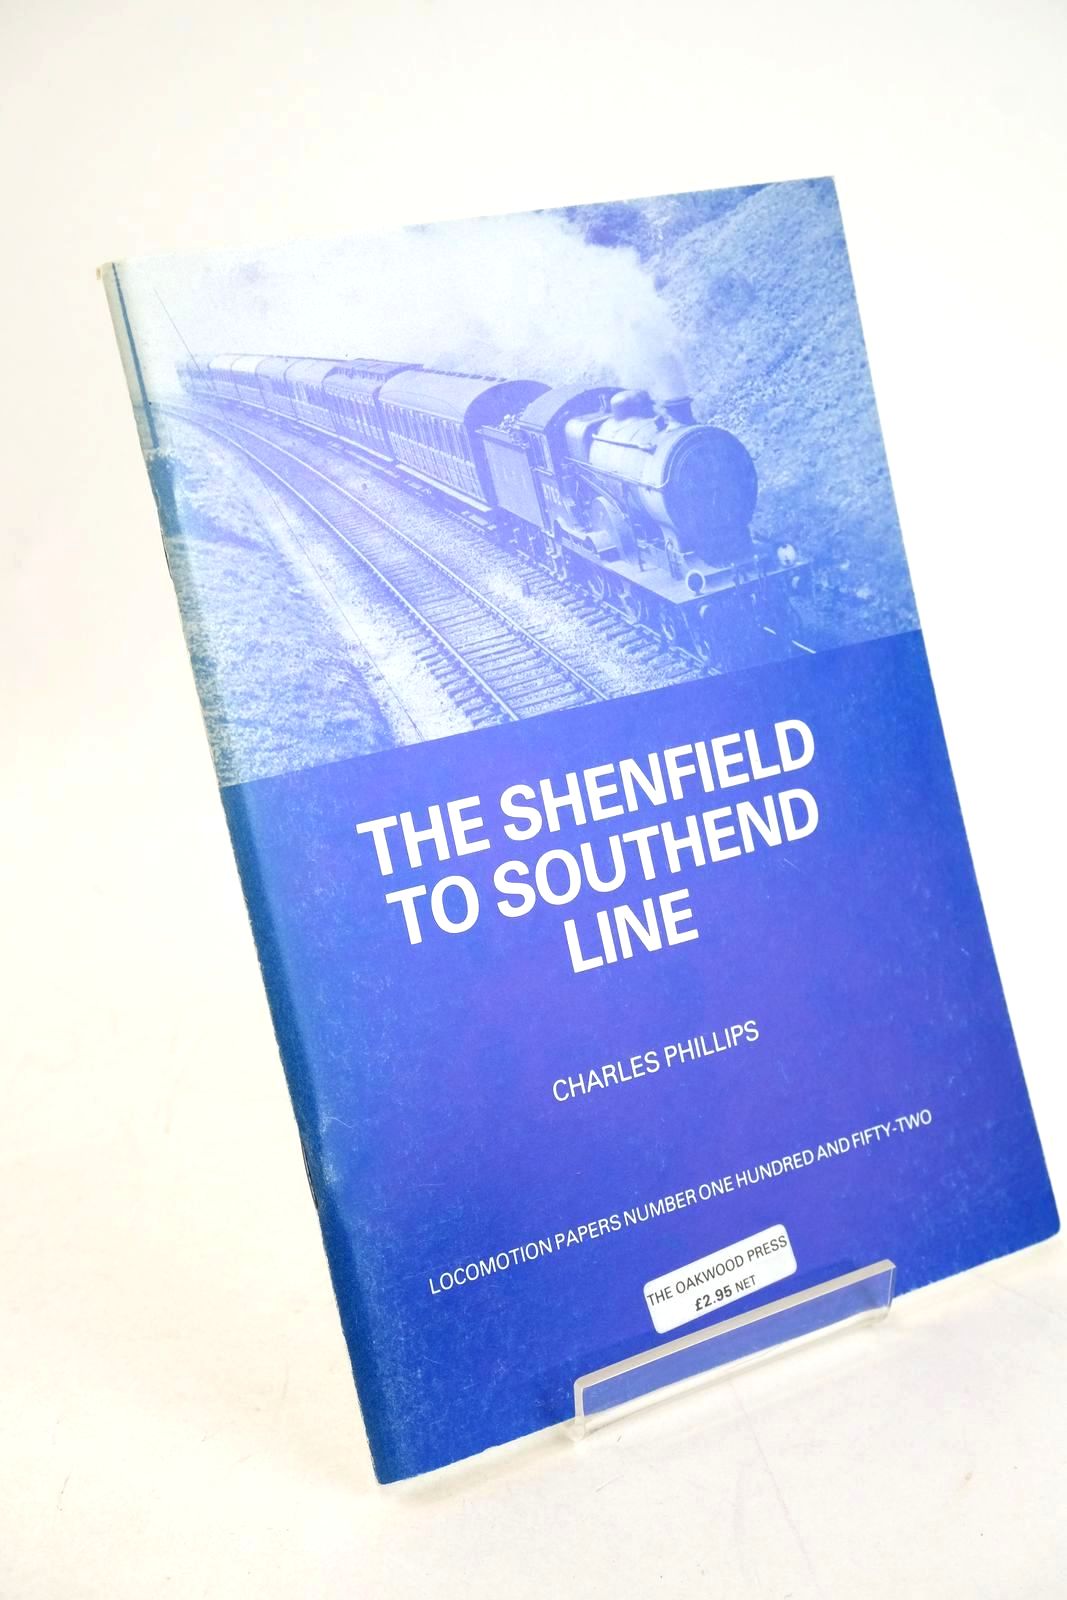 Photo of THE SHENFIELD TO SOUTHEND LINE written by Phillips, Charles published by The Oakwood Press (STOCK CODE: 1327490)  for sale by Stella & Rose's Books